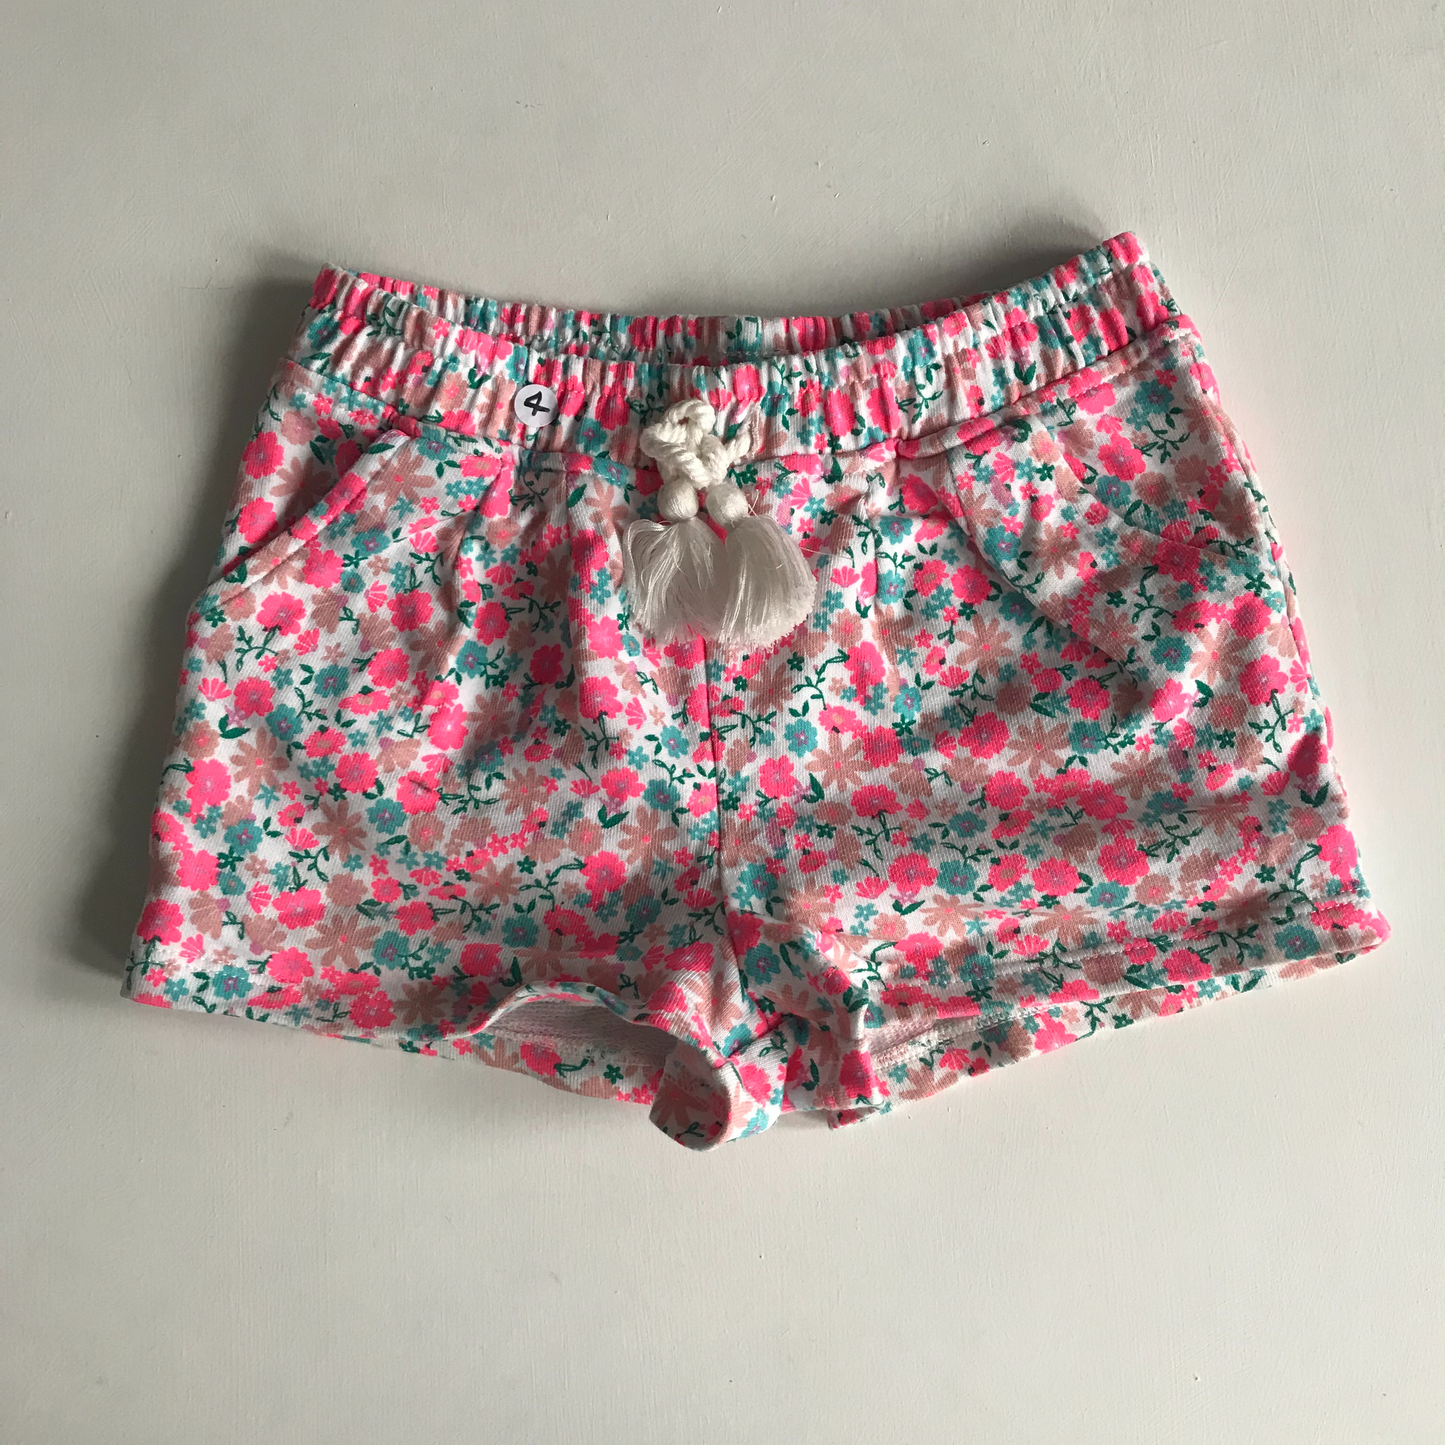 Shorts - Pink Floral - Age 4